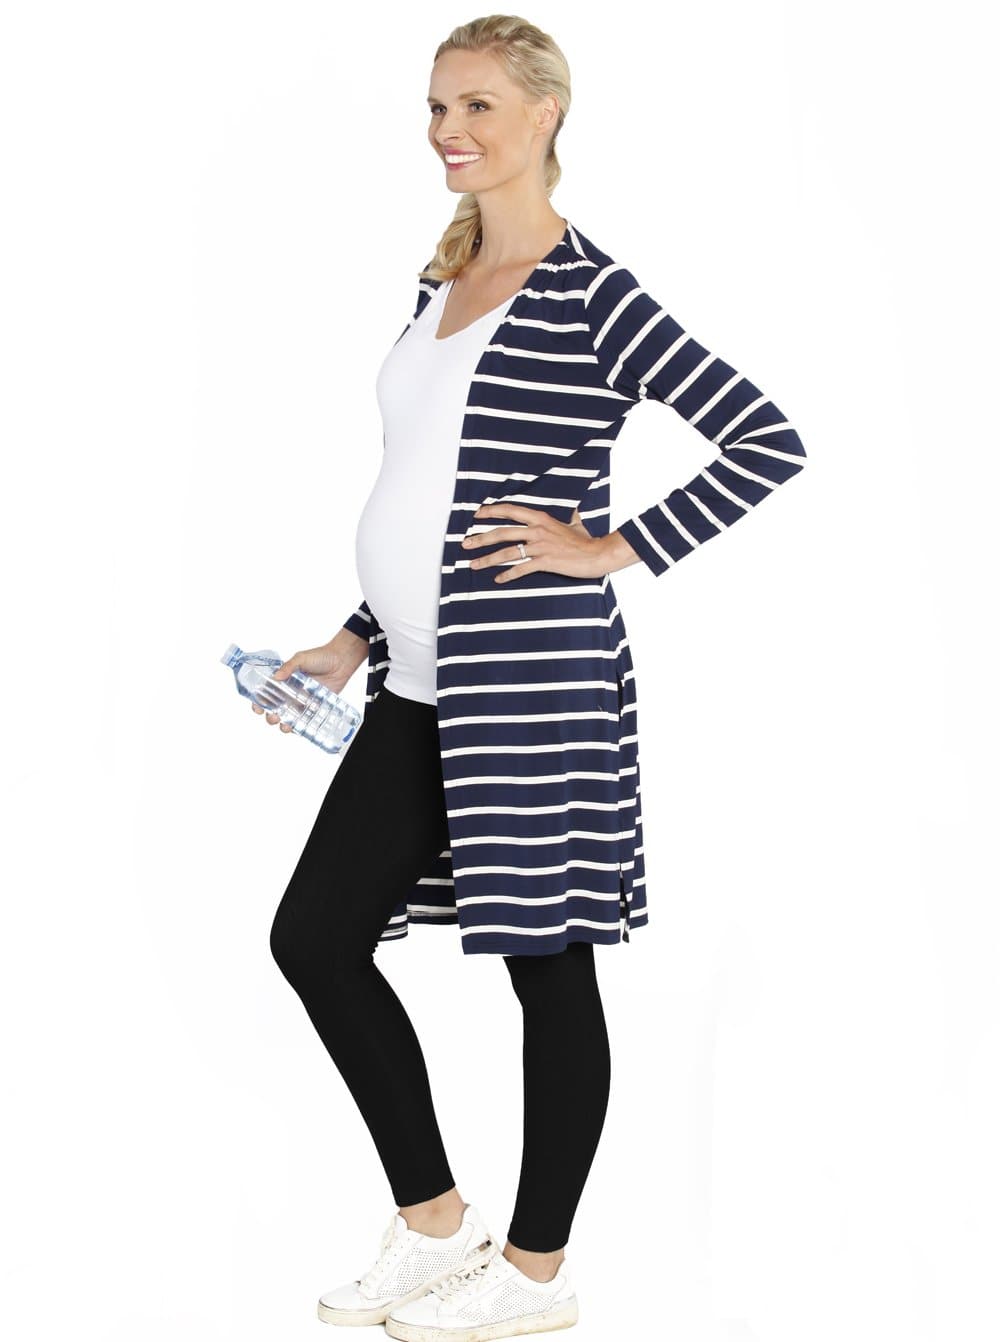 Nursing Lounge Outfit - Perfect Hospital Set - Angel Maternity - Maternity clothes - shop online (10810327765)